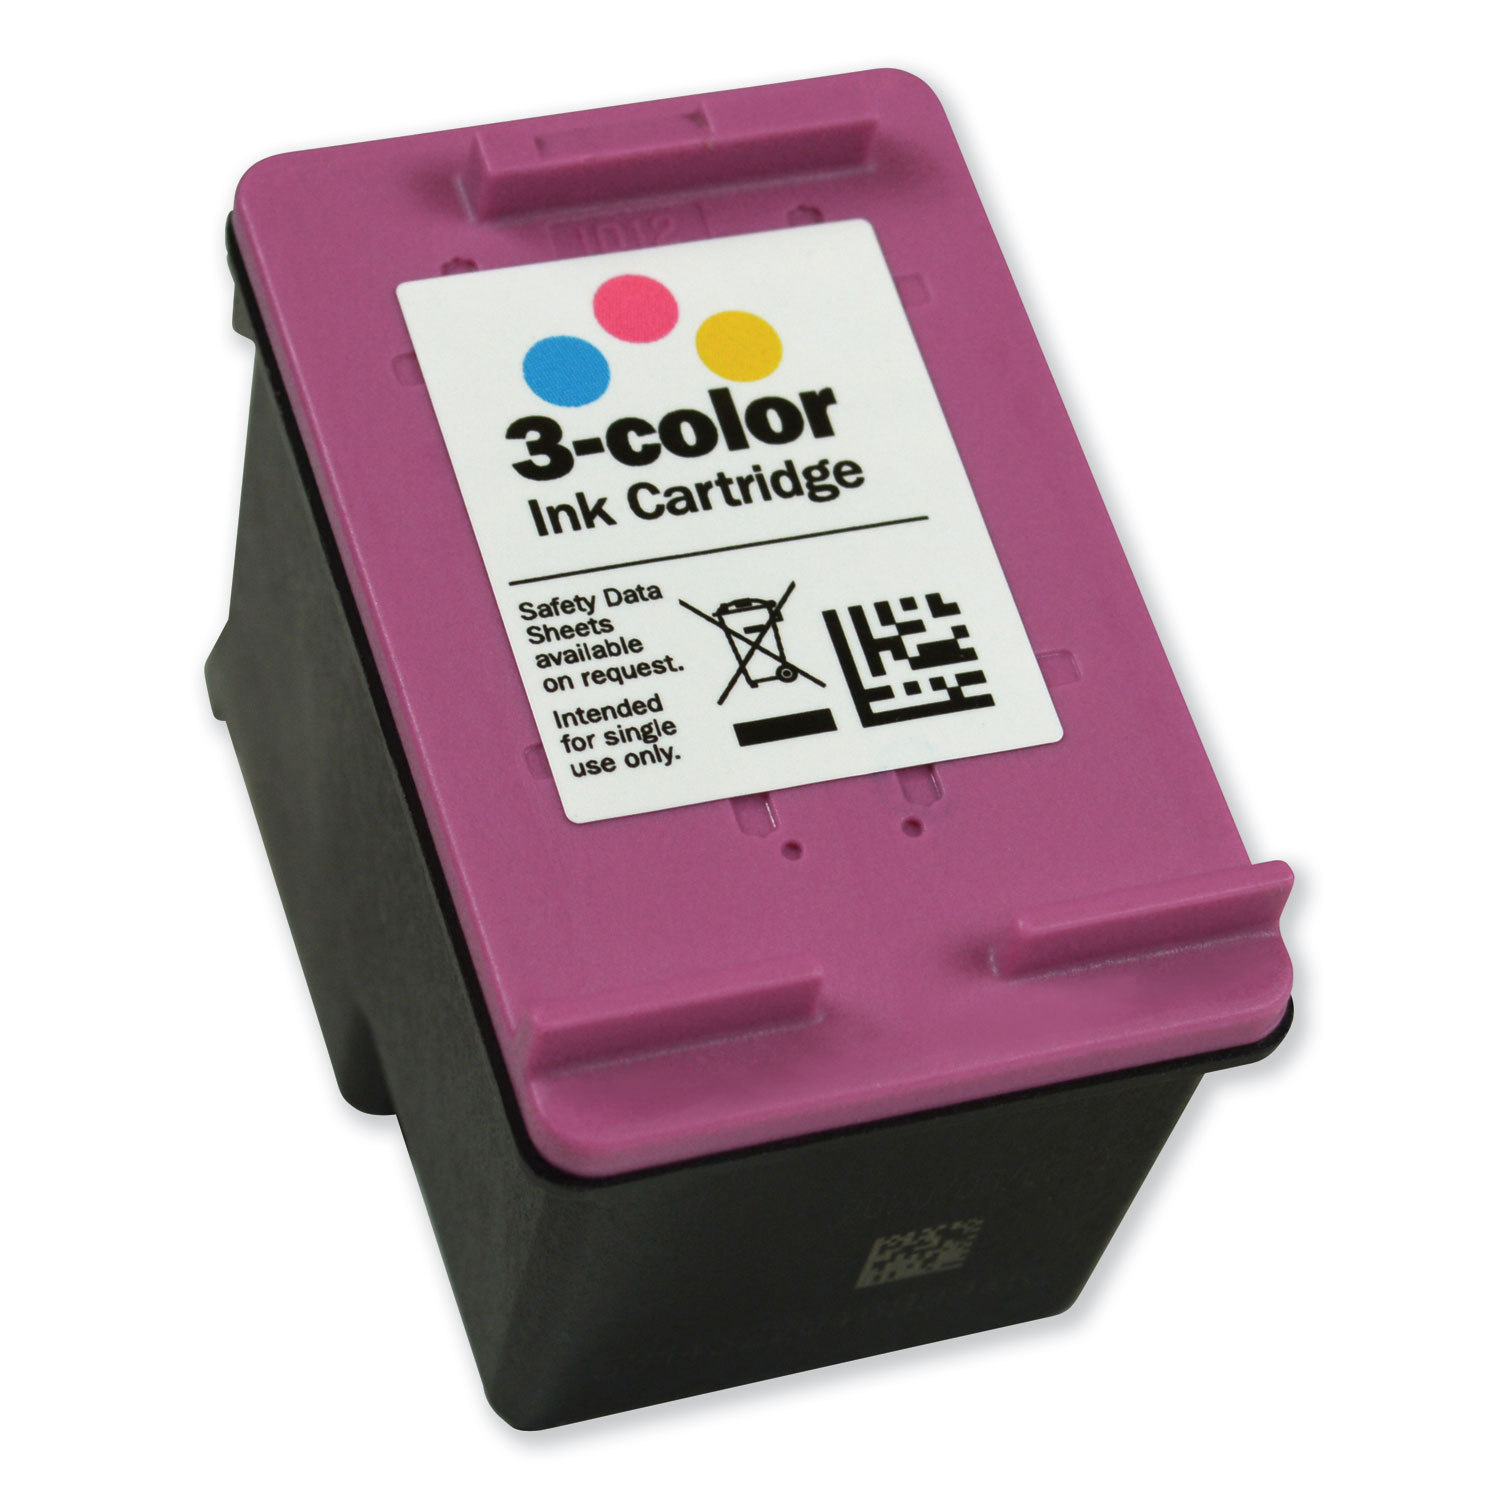  Colop e-mark 039203 Digital Marking Device Replacement Ink, Cyan/Magenta/Yellow (COS039203) 